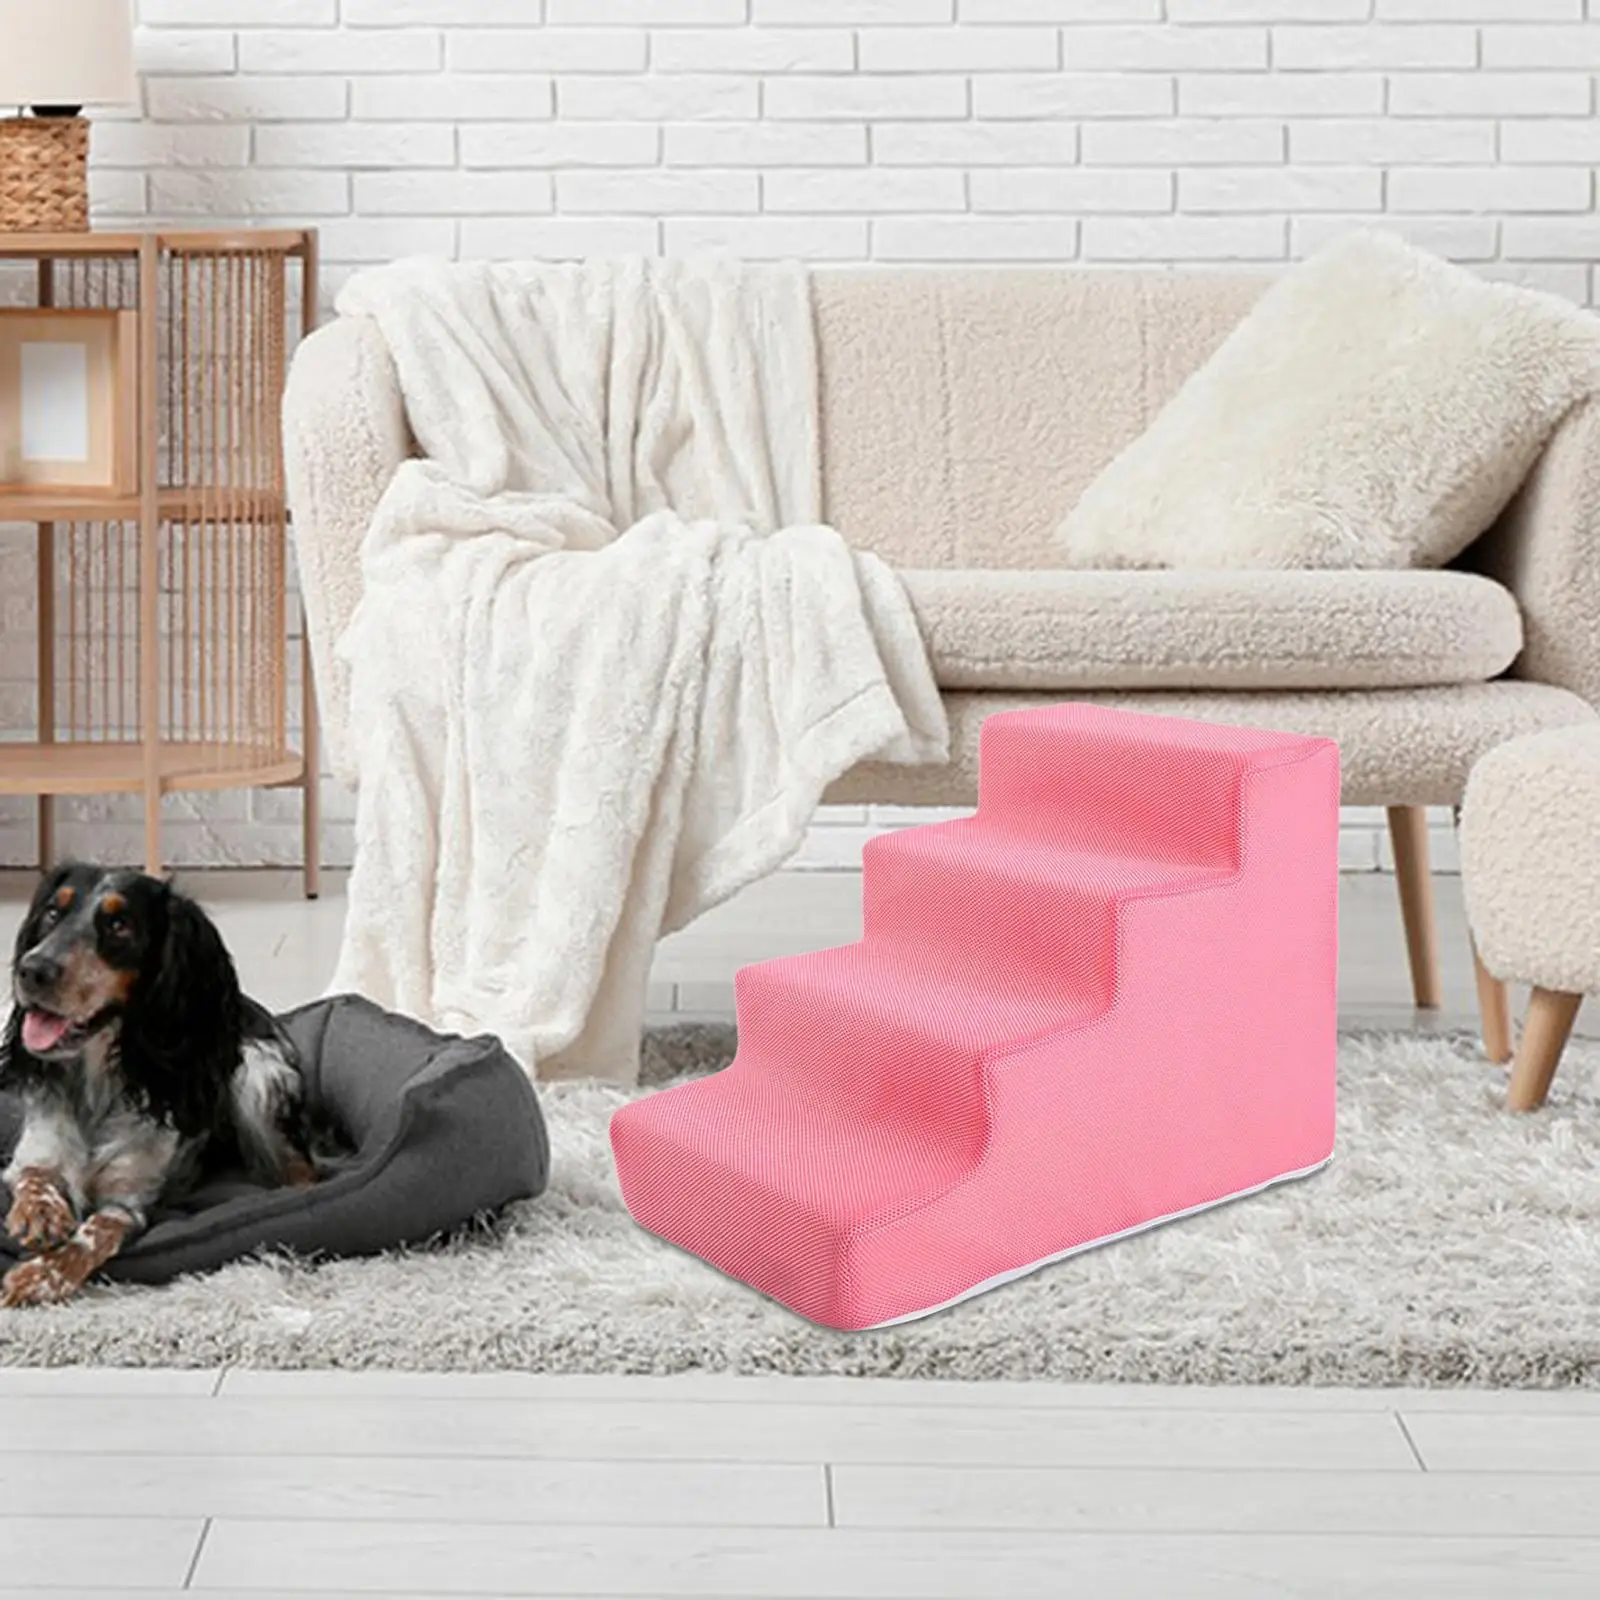 High Density Pet Steps Ladder Non Slip Pet Stairs Balanced Pet Steps Pet Ladder for High Beds Sofa Couch Car Small Dogs and Cats